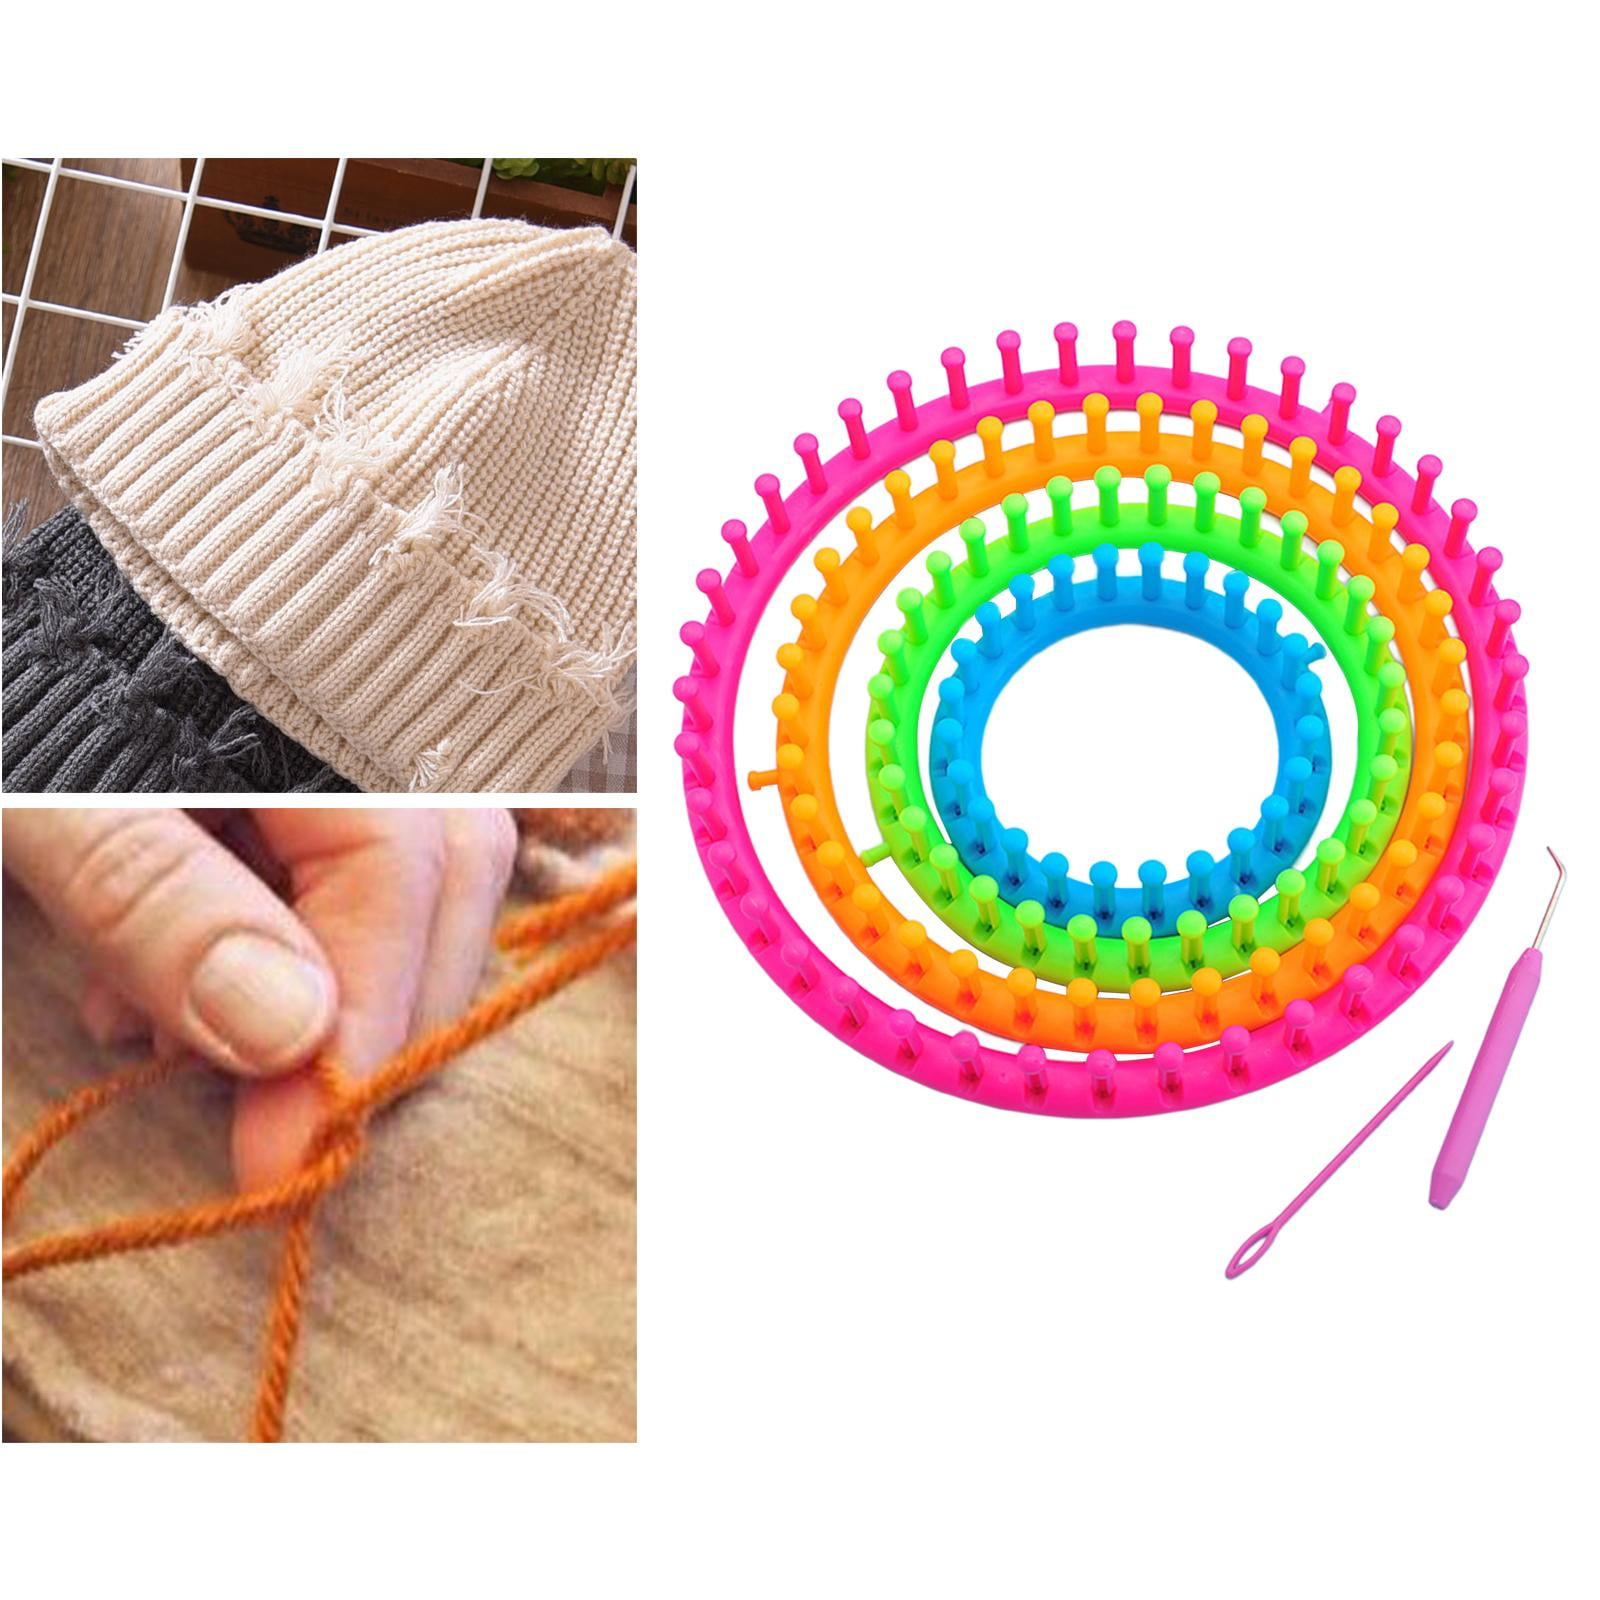 Mira Handcrafts Complete Round Knitting Loom Kit | 4 Knitting Circle Looms, 4 Pompom Makers, 3 Plastic Needles, 1 Soft Grip Pick | Perfect Crochet